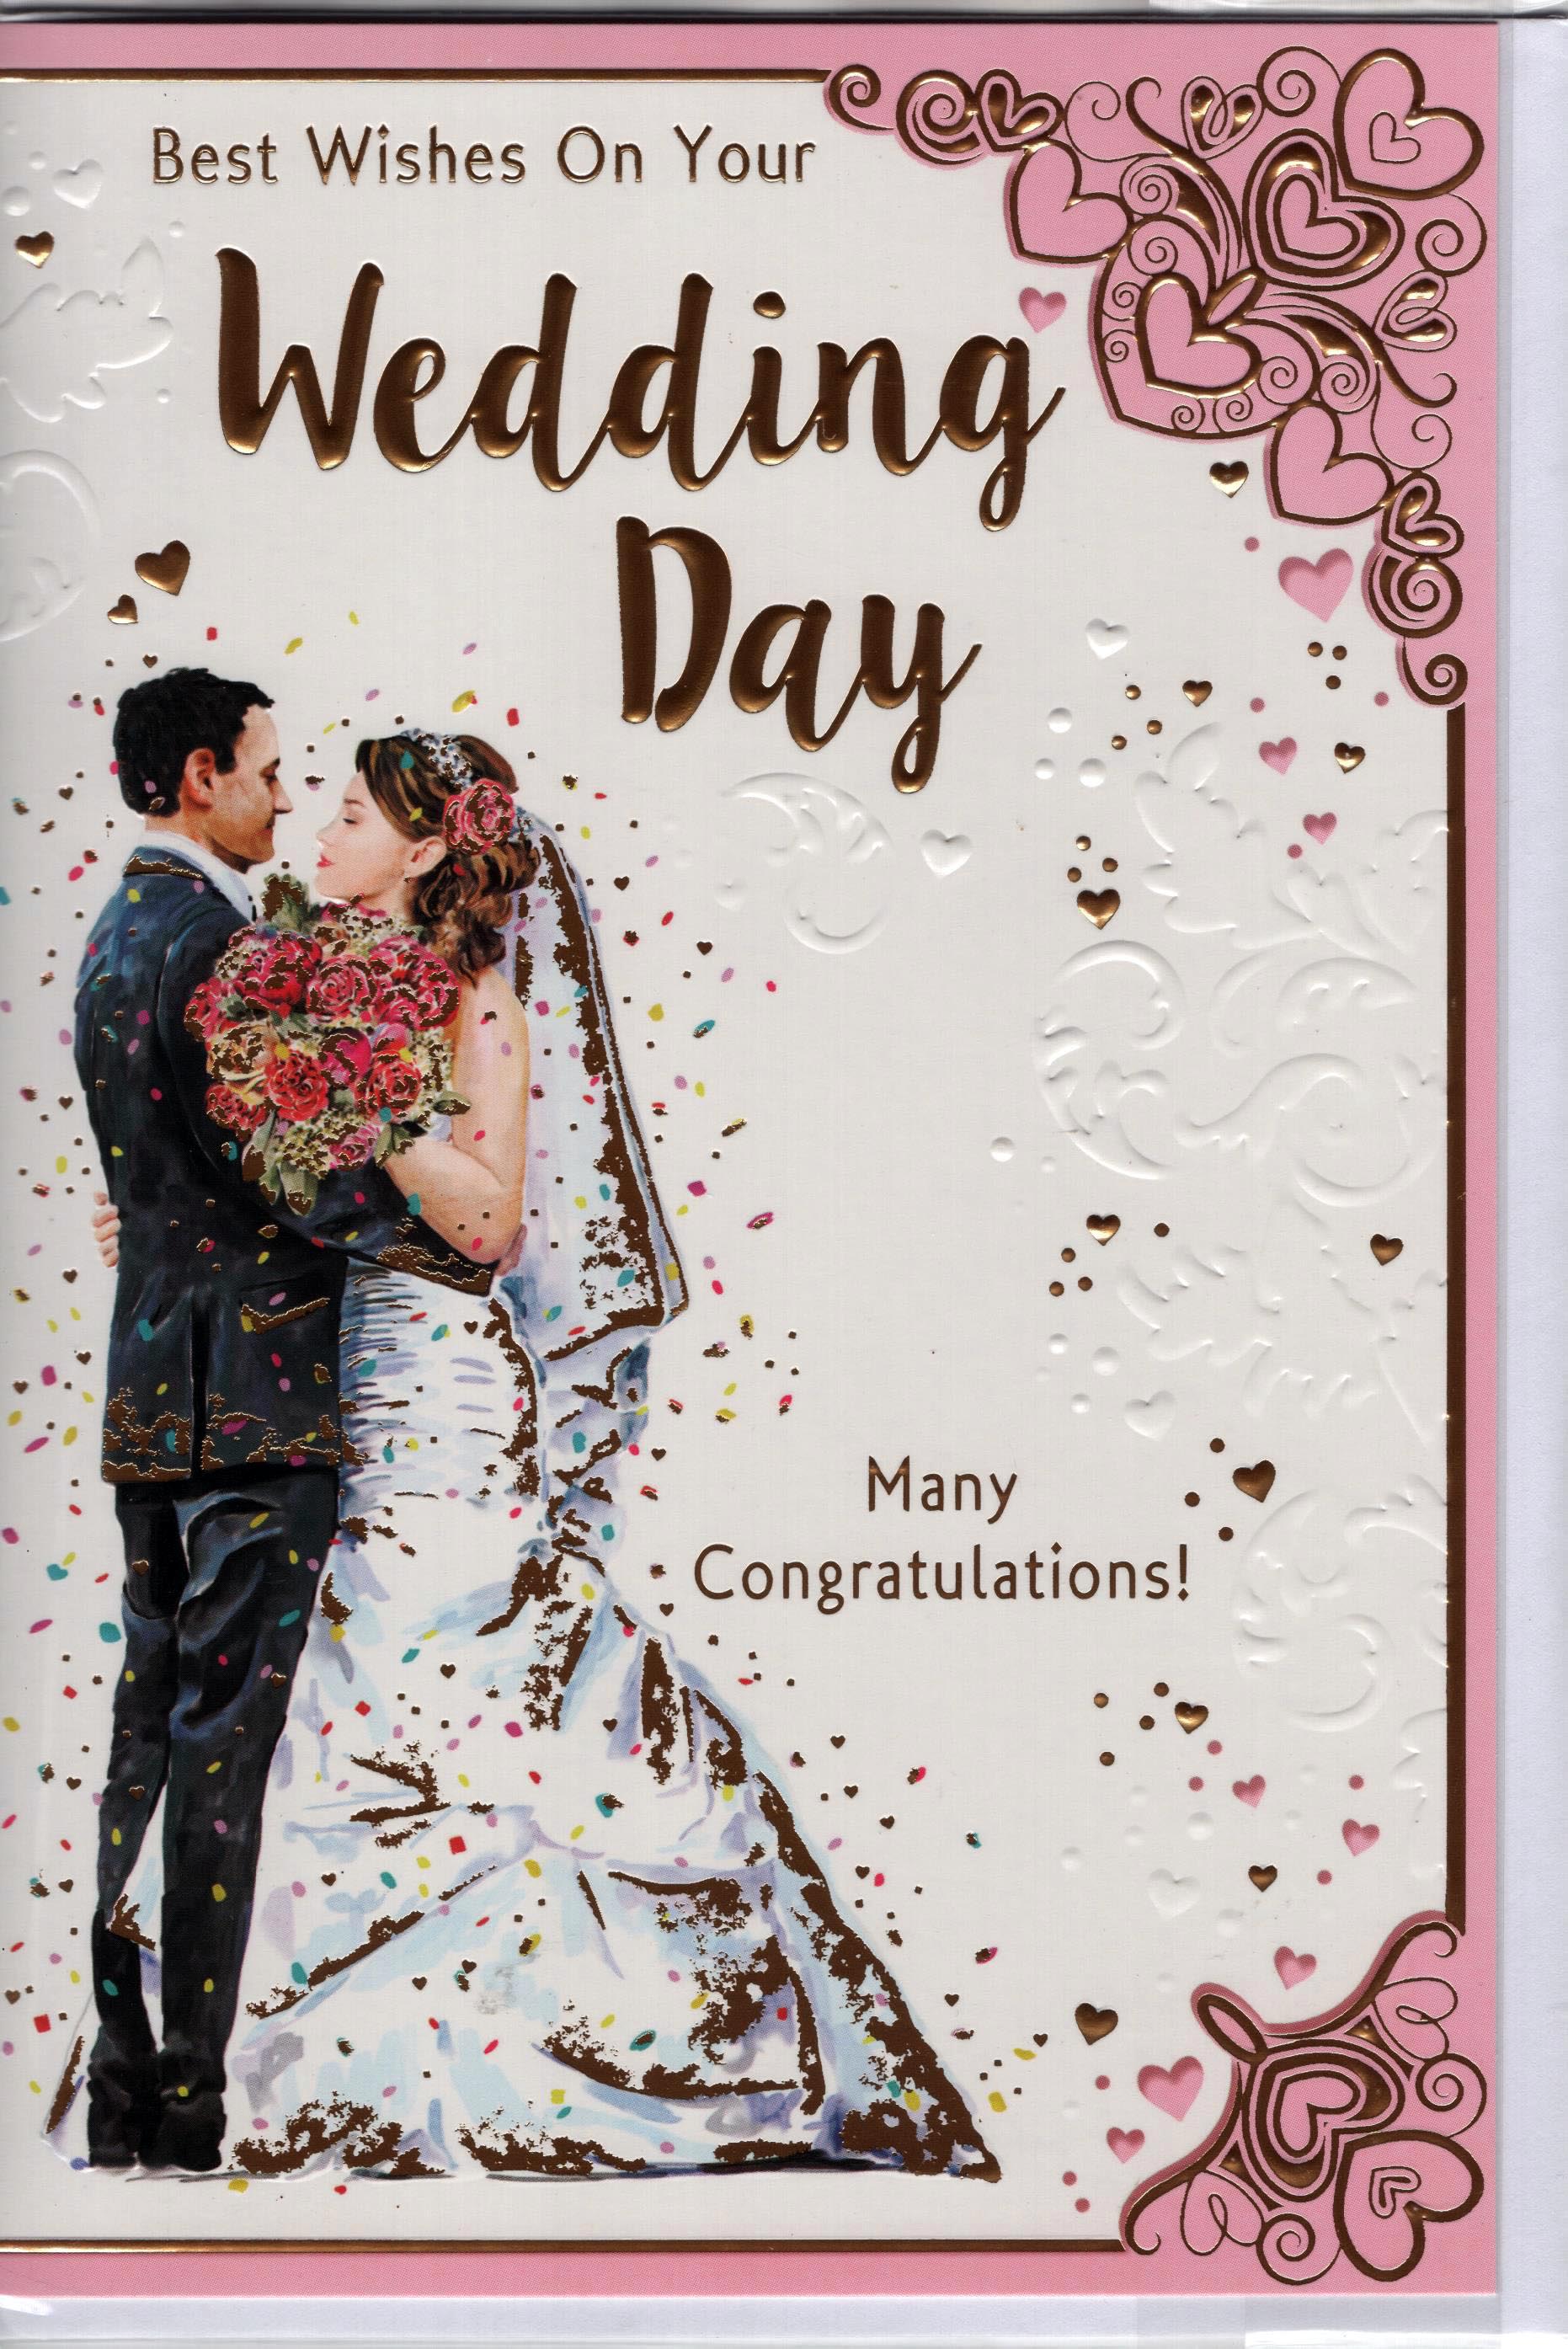 Best Wishes On Your Wedding Day Many Congratulations!